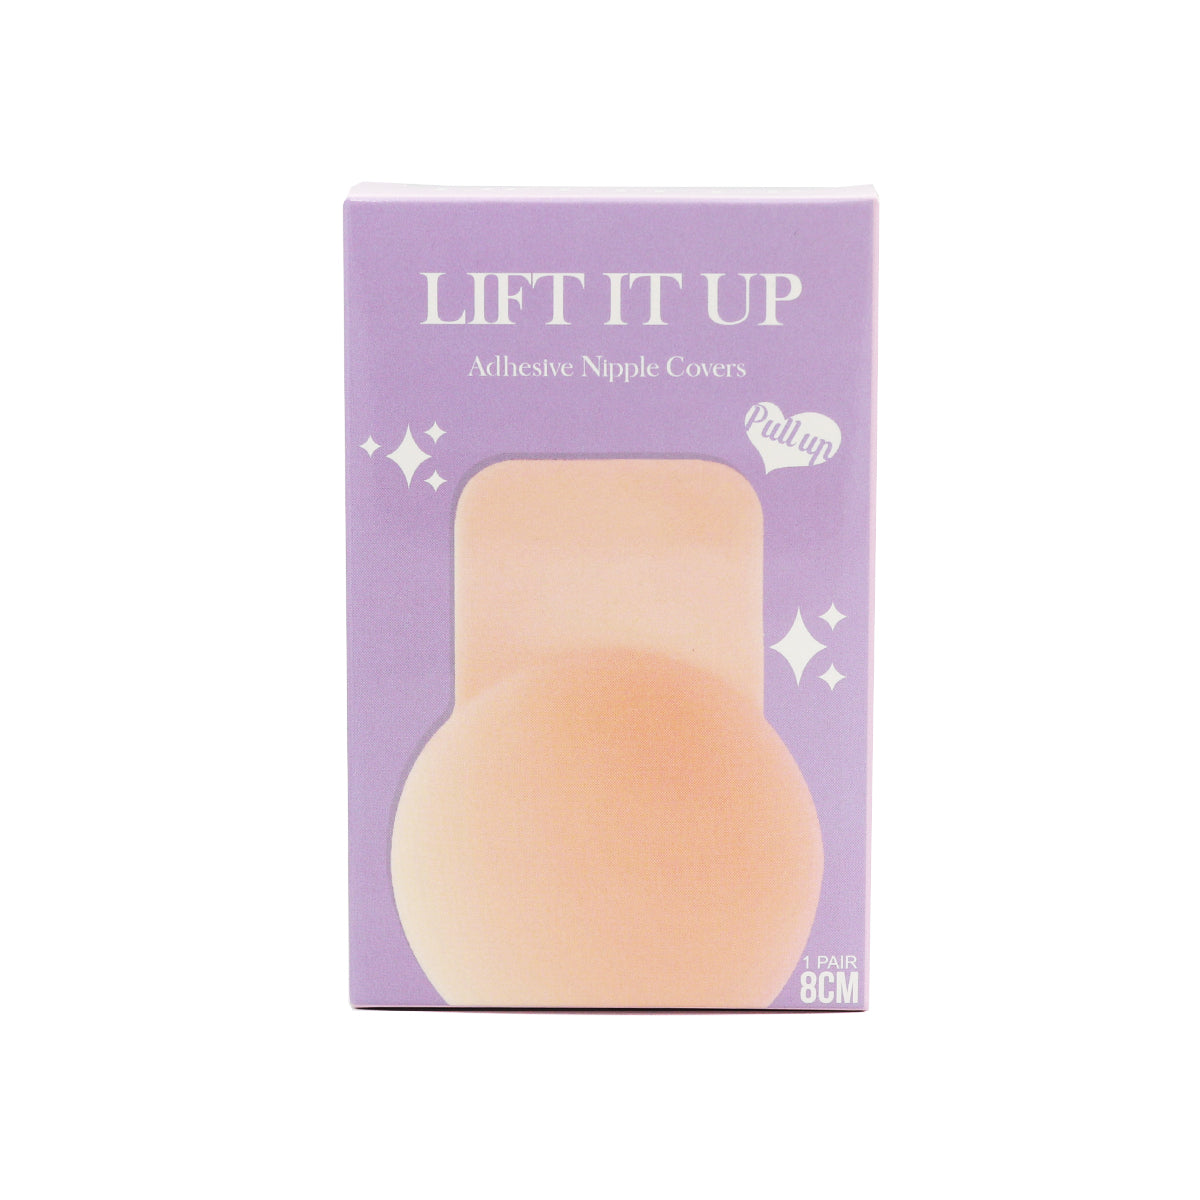 Tamme Lift it Up (Adhesive Nipple Covers) – Building Roots PH